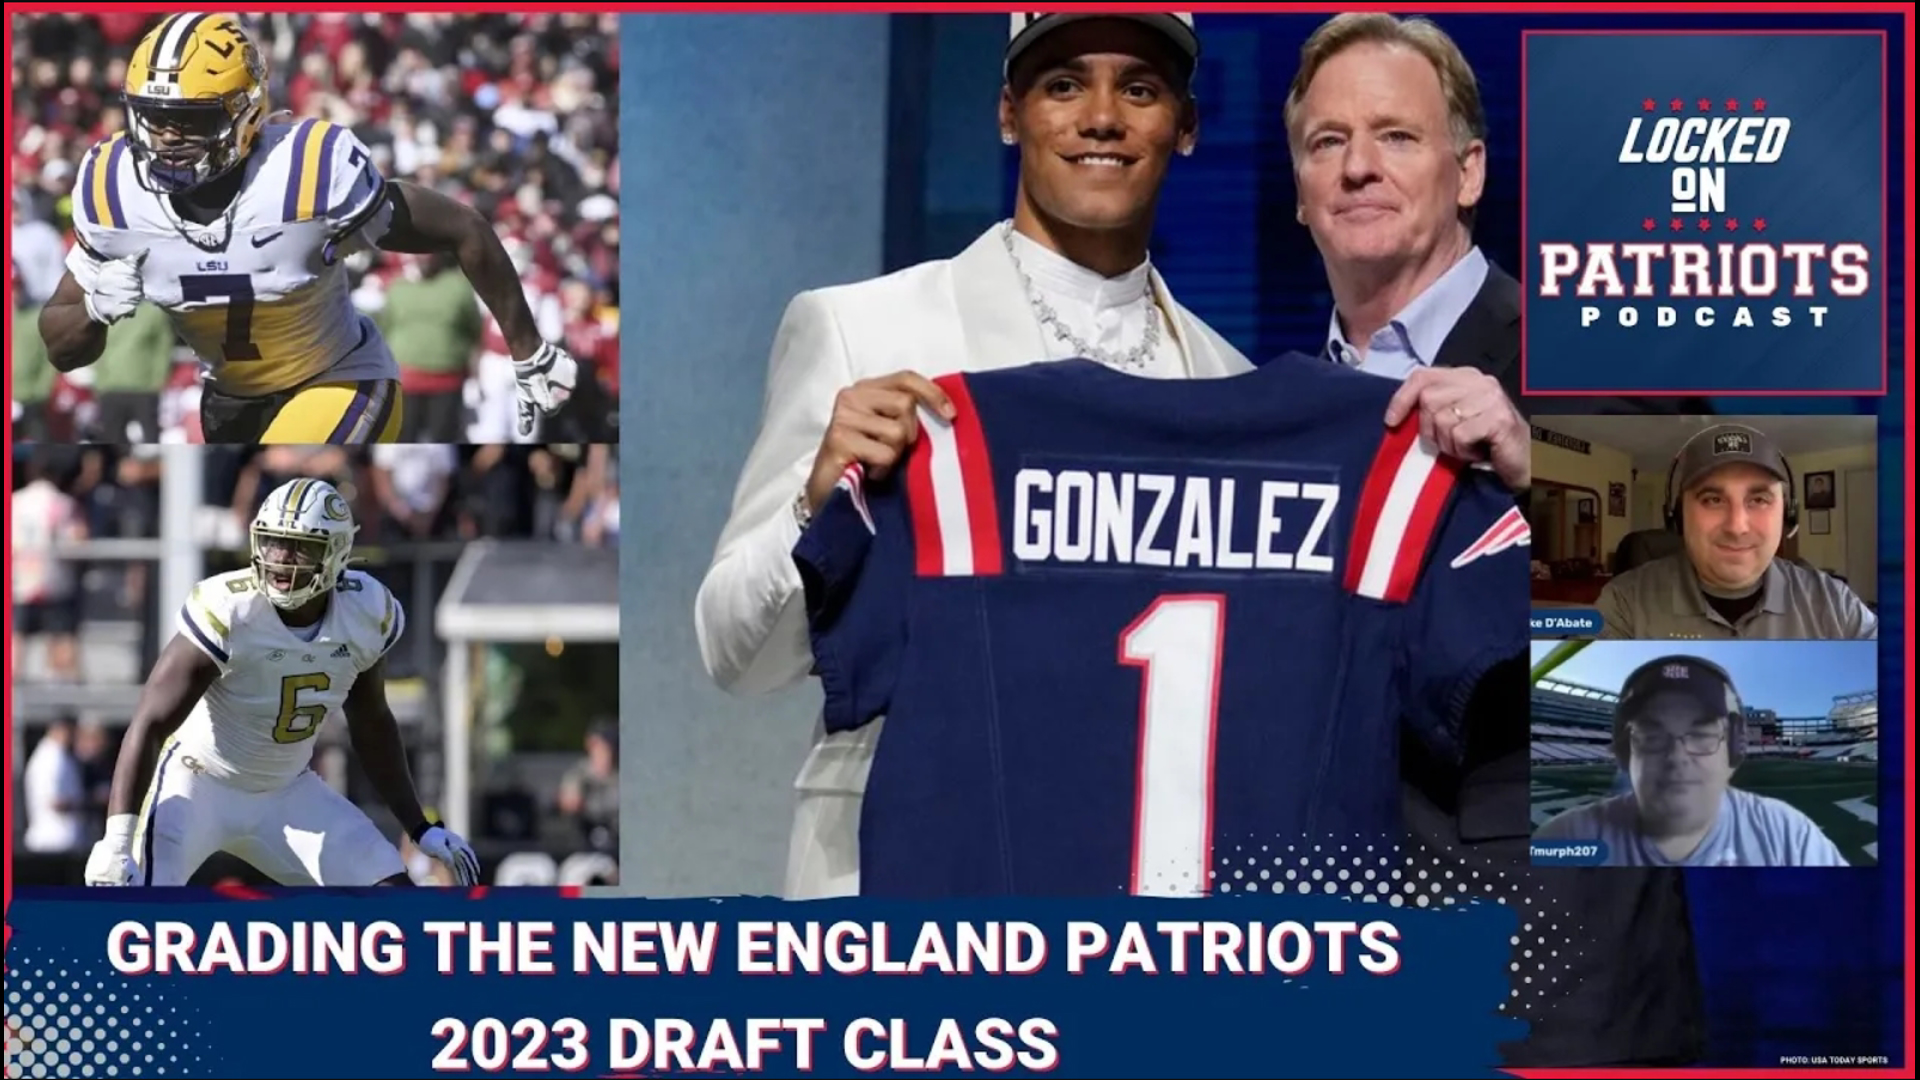 The New England Patriots are set to welcome their largest Draft class in more than a decade in 2023.